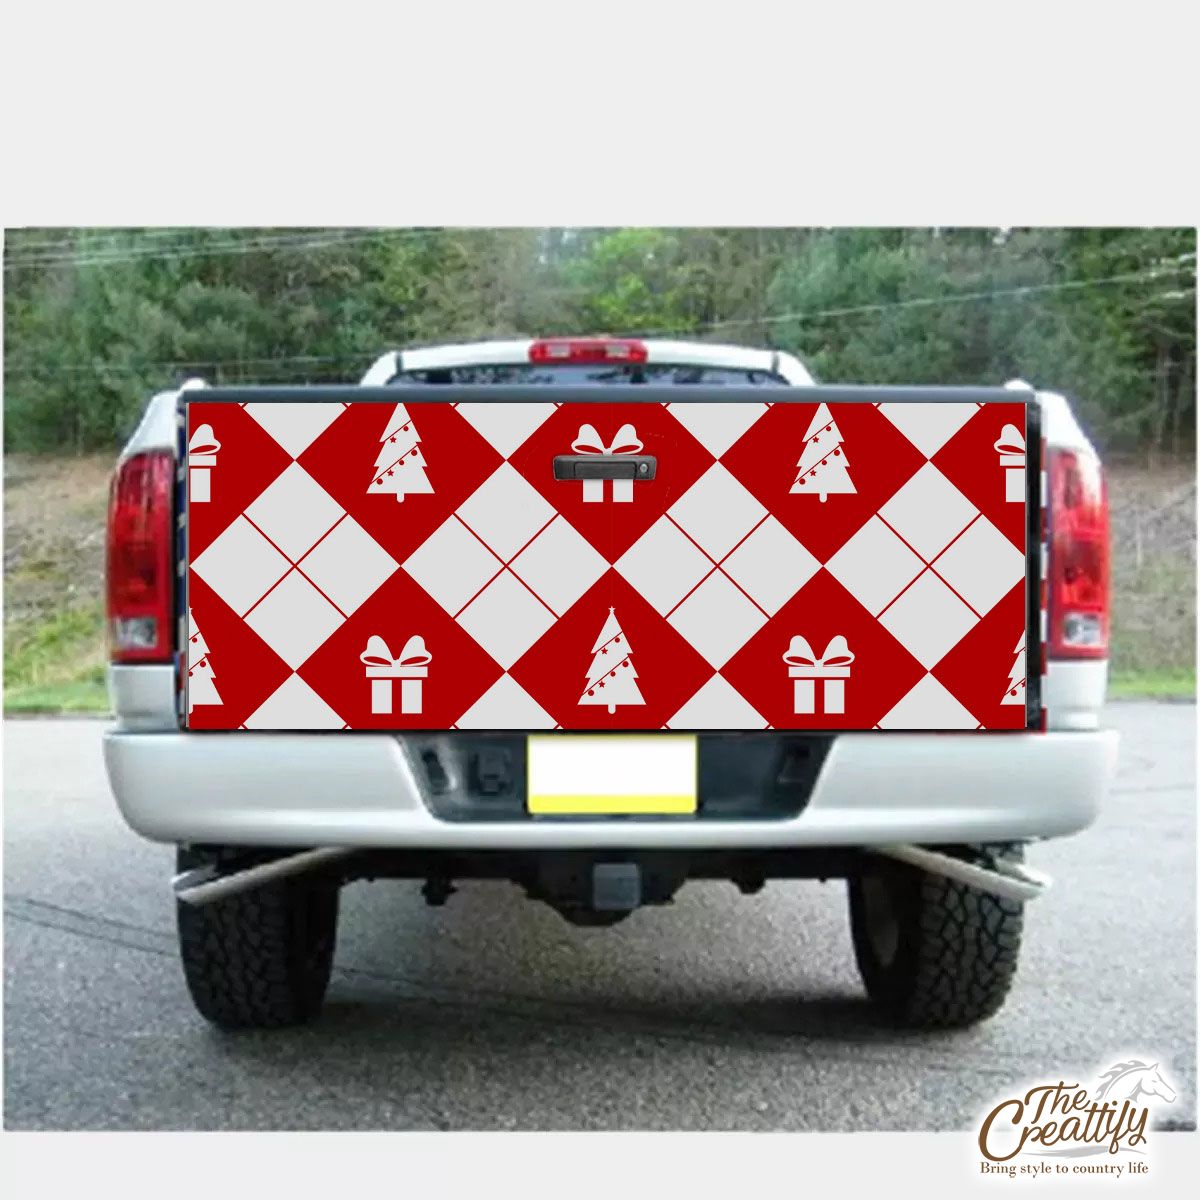 Christmas Gifts And Pine Tree Decorated With Lights On Red And White Background Truck Bed Decal